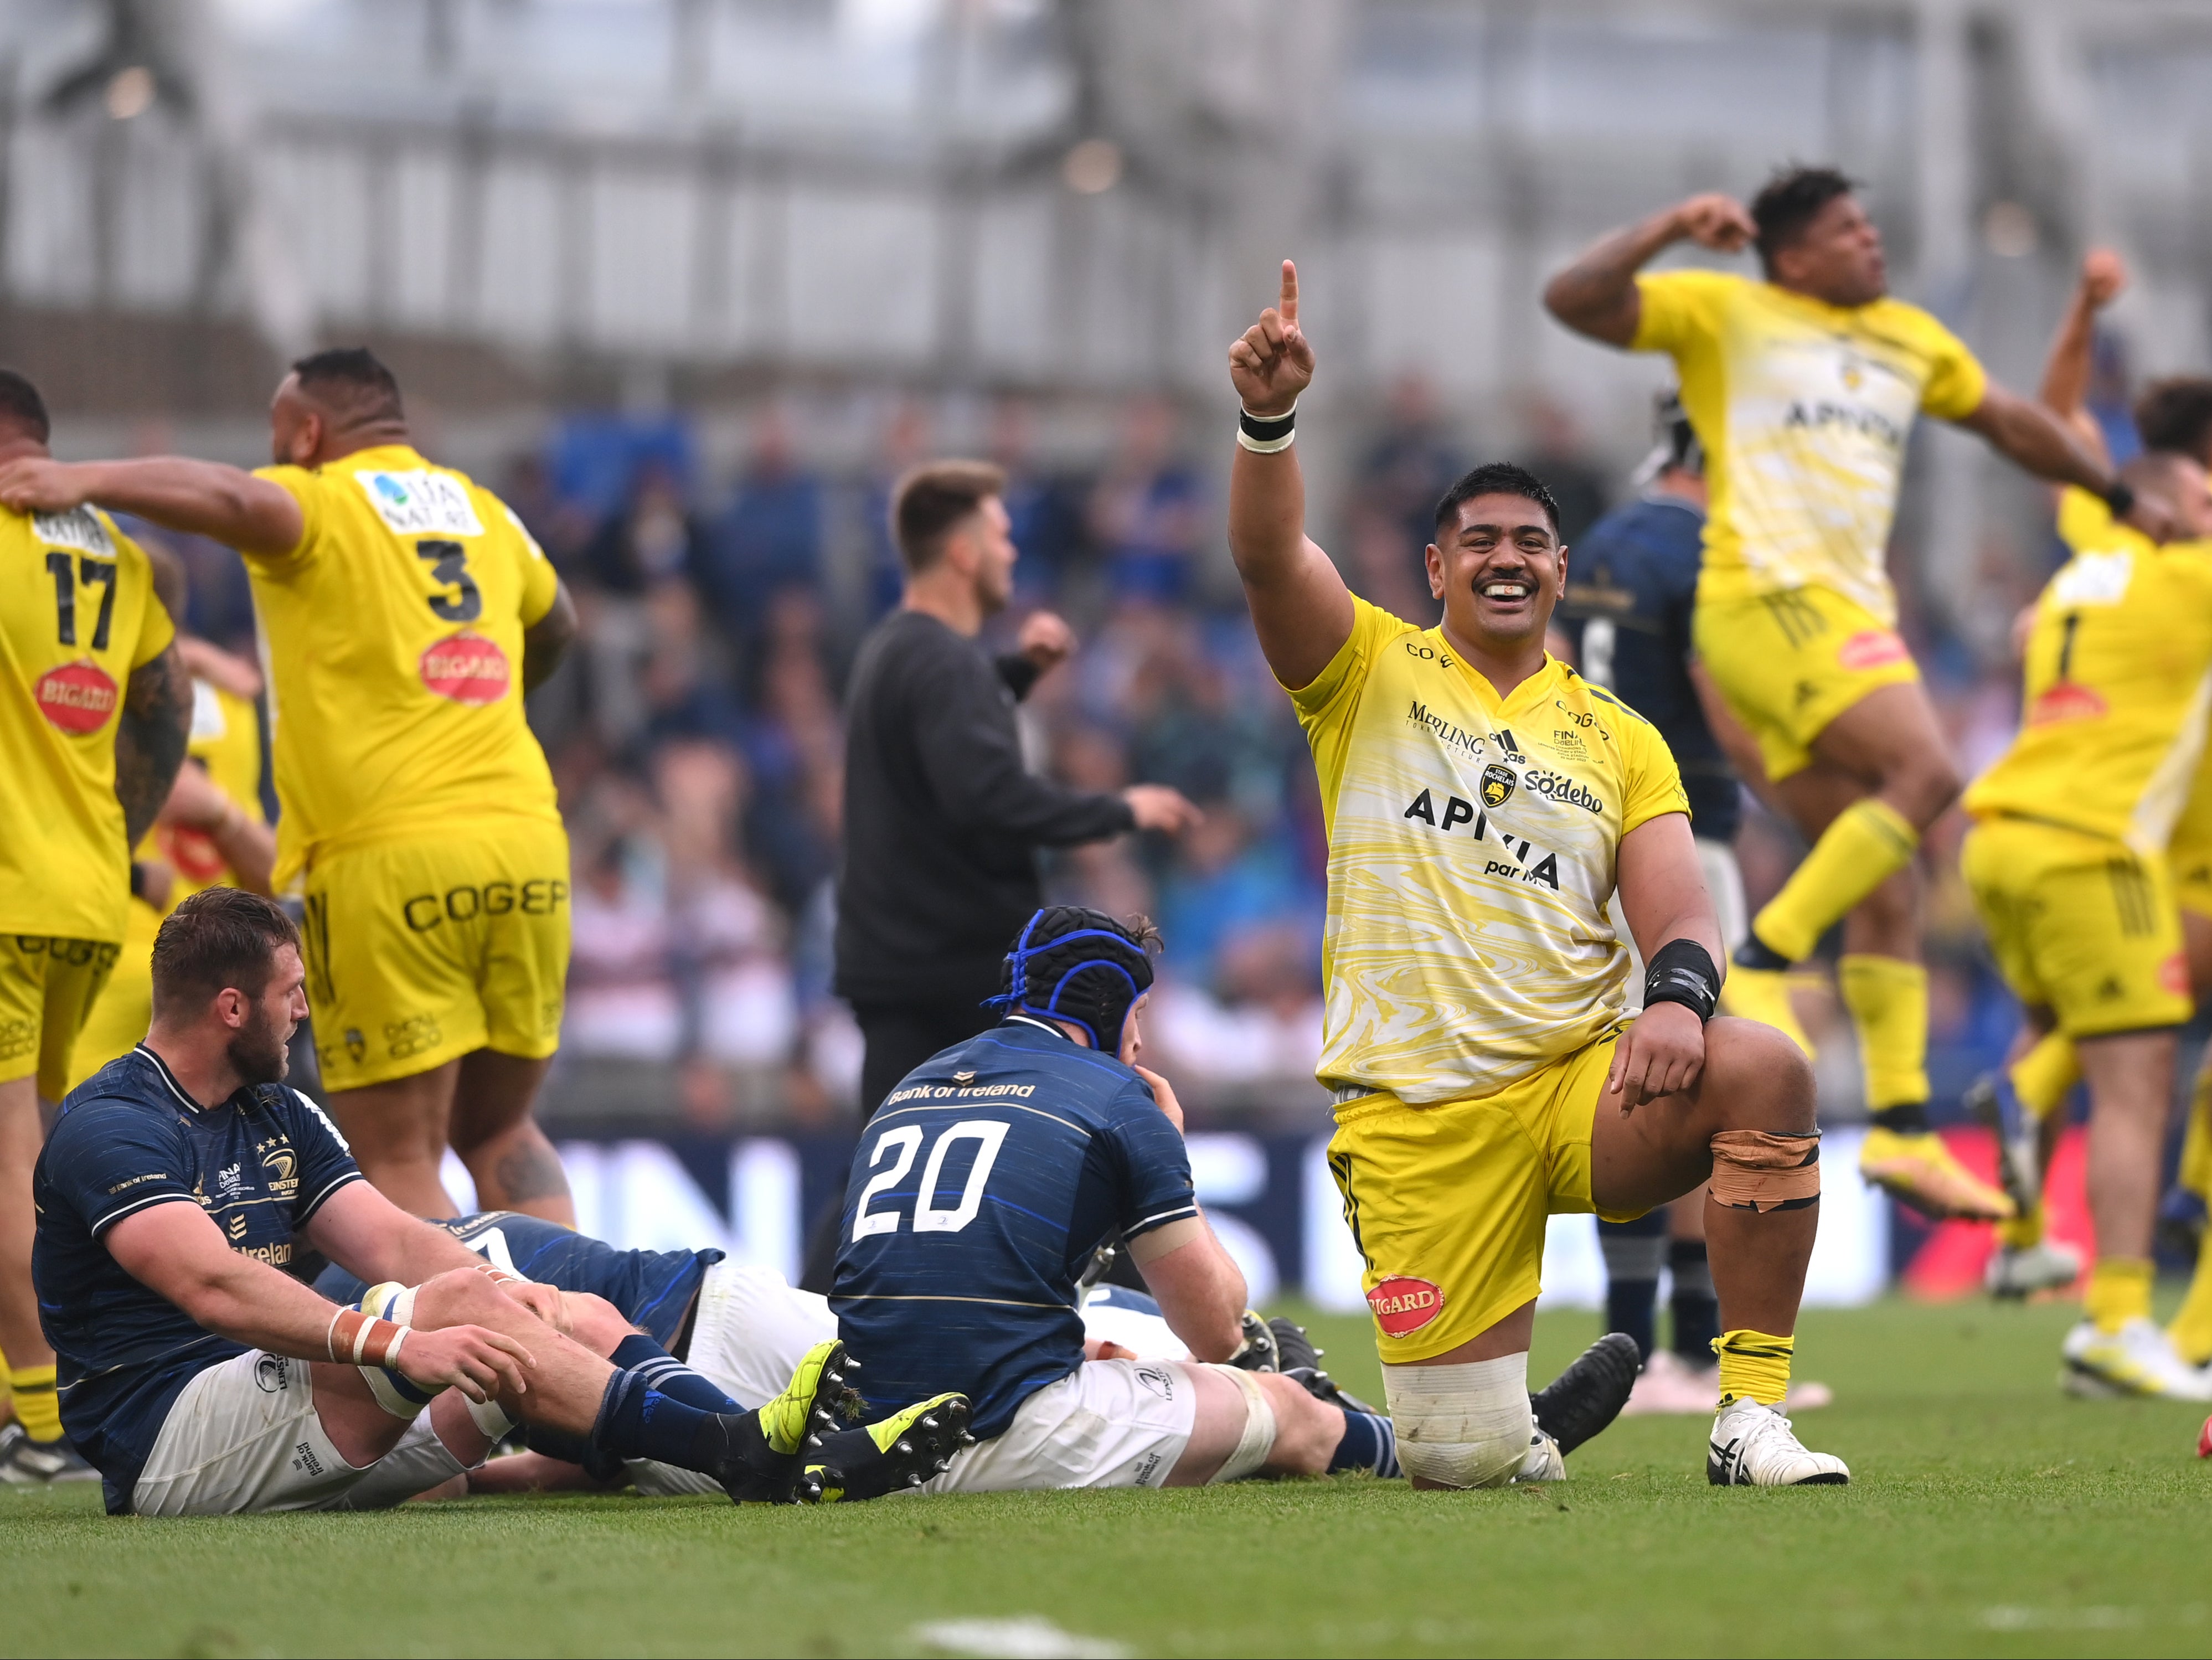 Will Skelton and La Rochelle celebrate after beating Leinster in Dublin